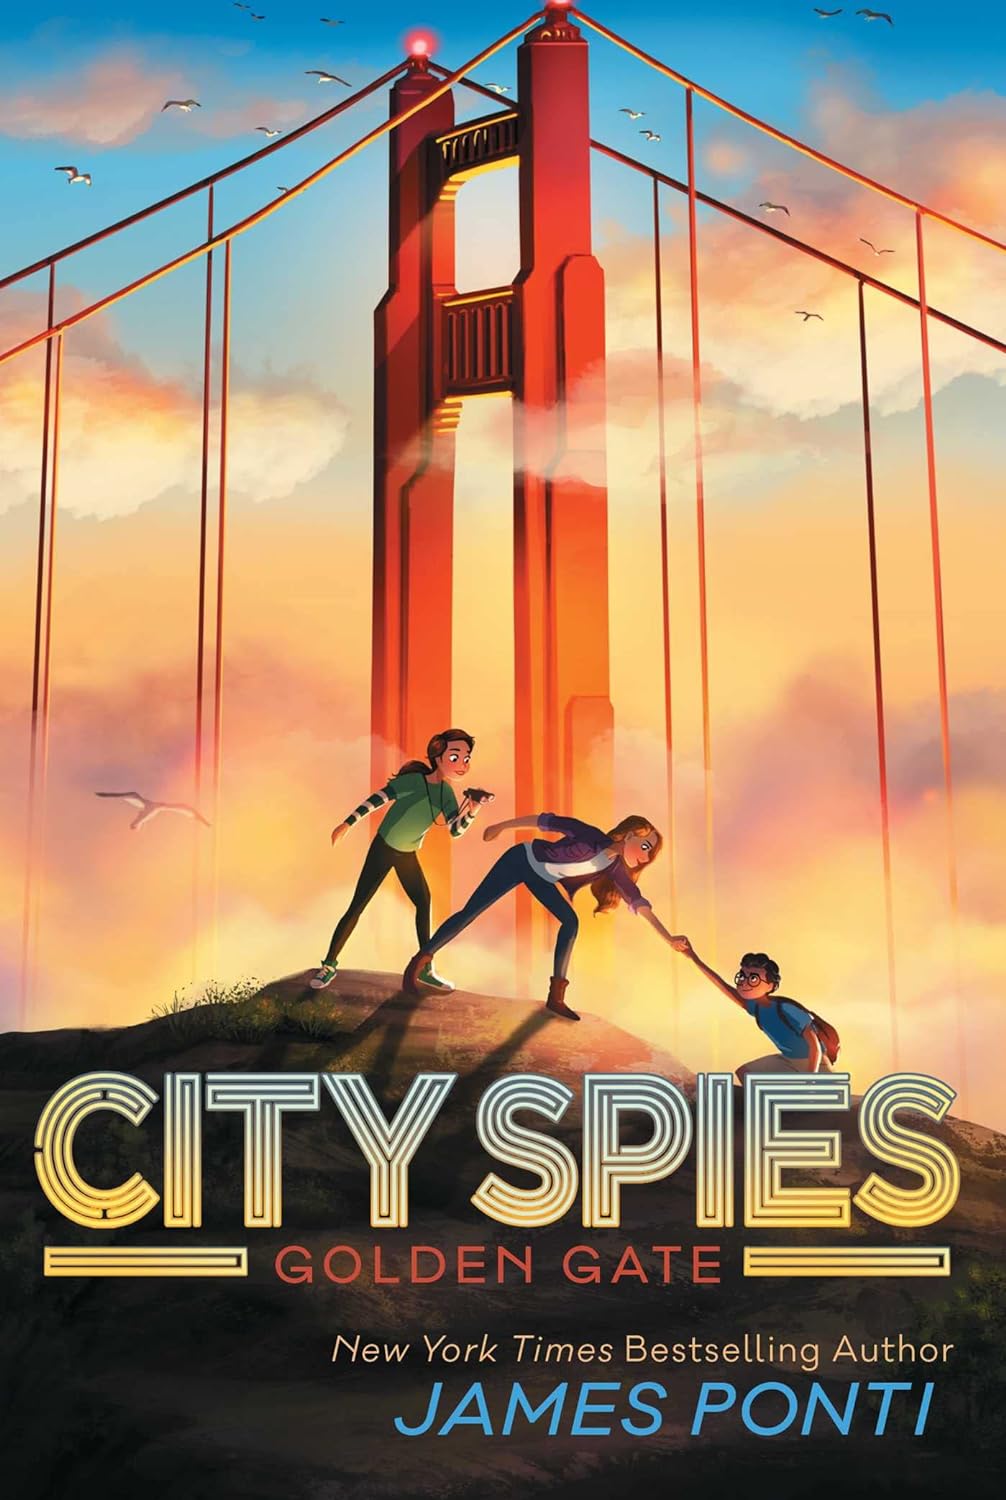 Golden Gate (City Spies #2) - by James Ponti